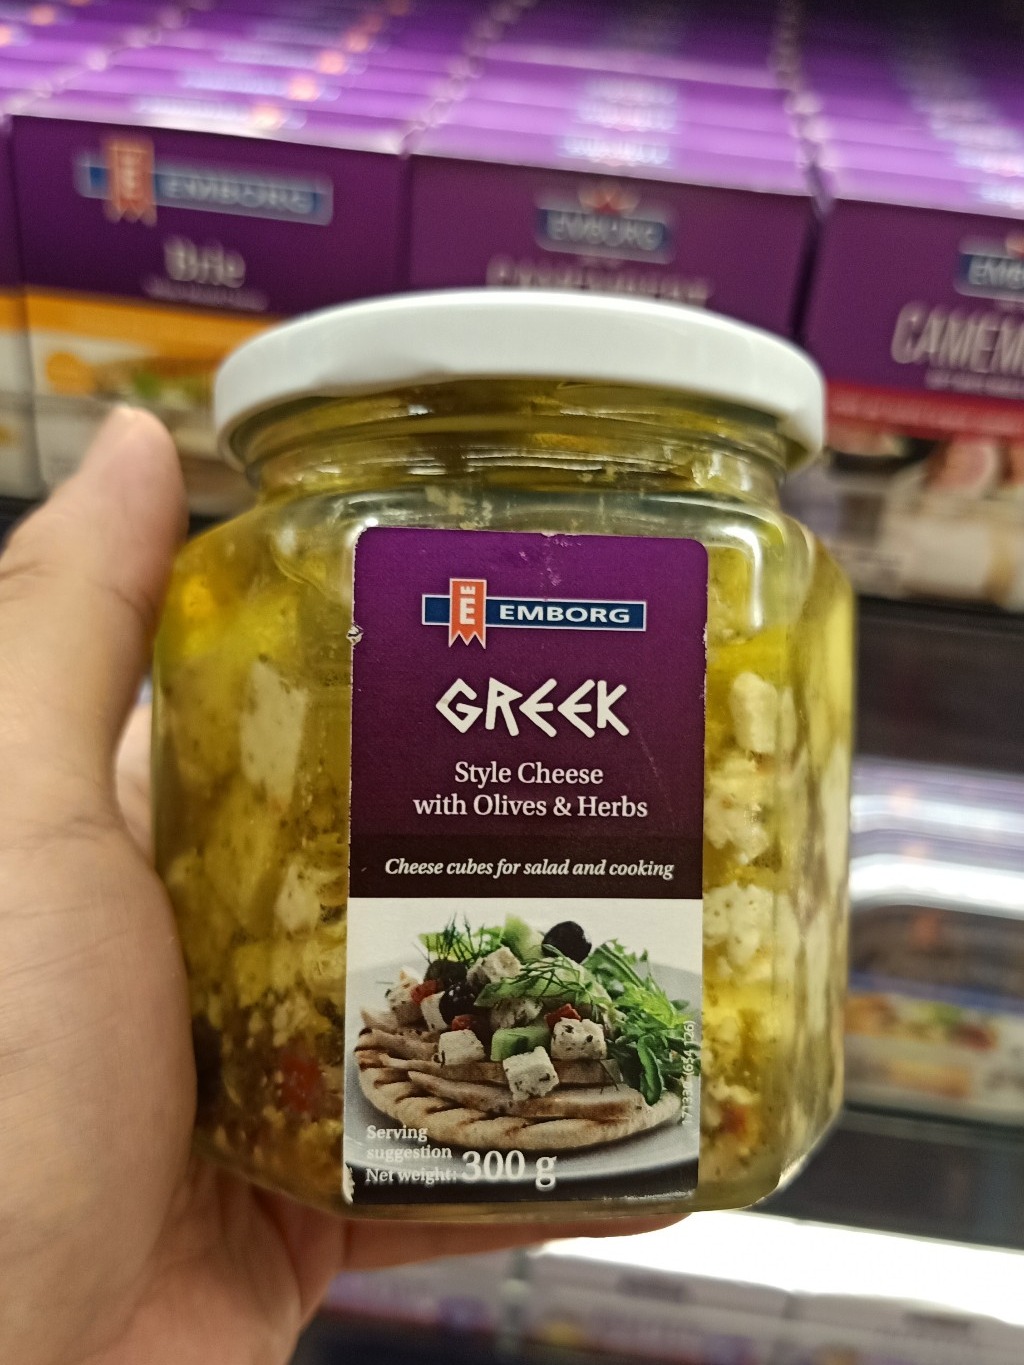 ecook ผลิตภัณฑ์ เนยแข็ง ในน้ำมัน เรปซีด ผสม มะกอก และสมุนไพร g emborg greek style cheese with olives hearbs for salad and cooking 300g